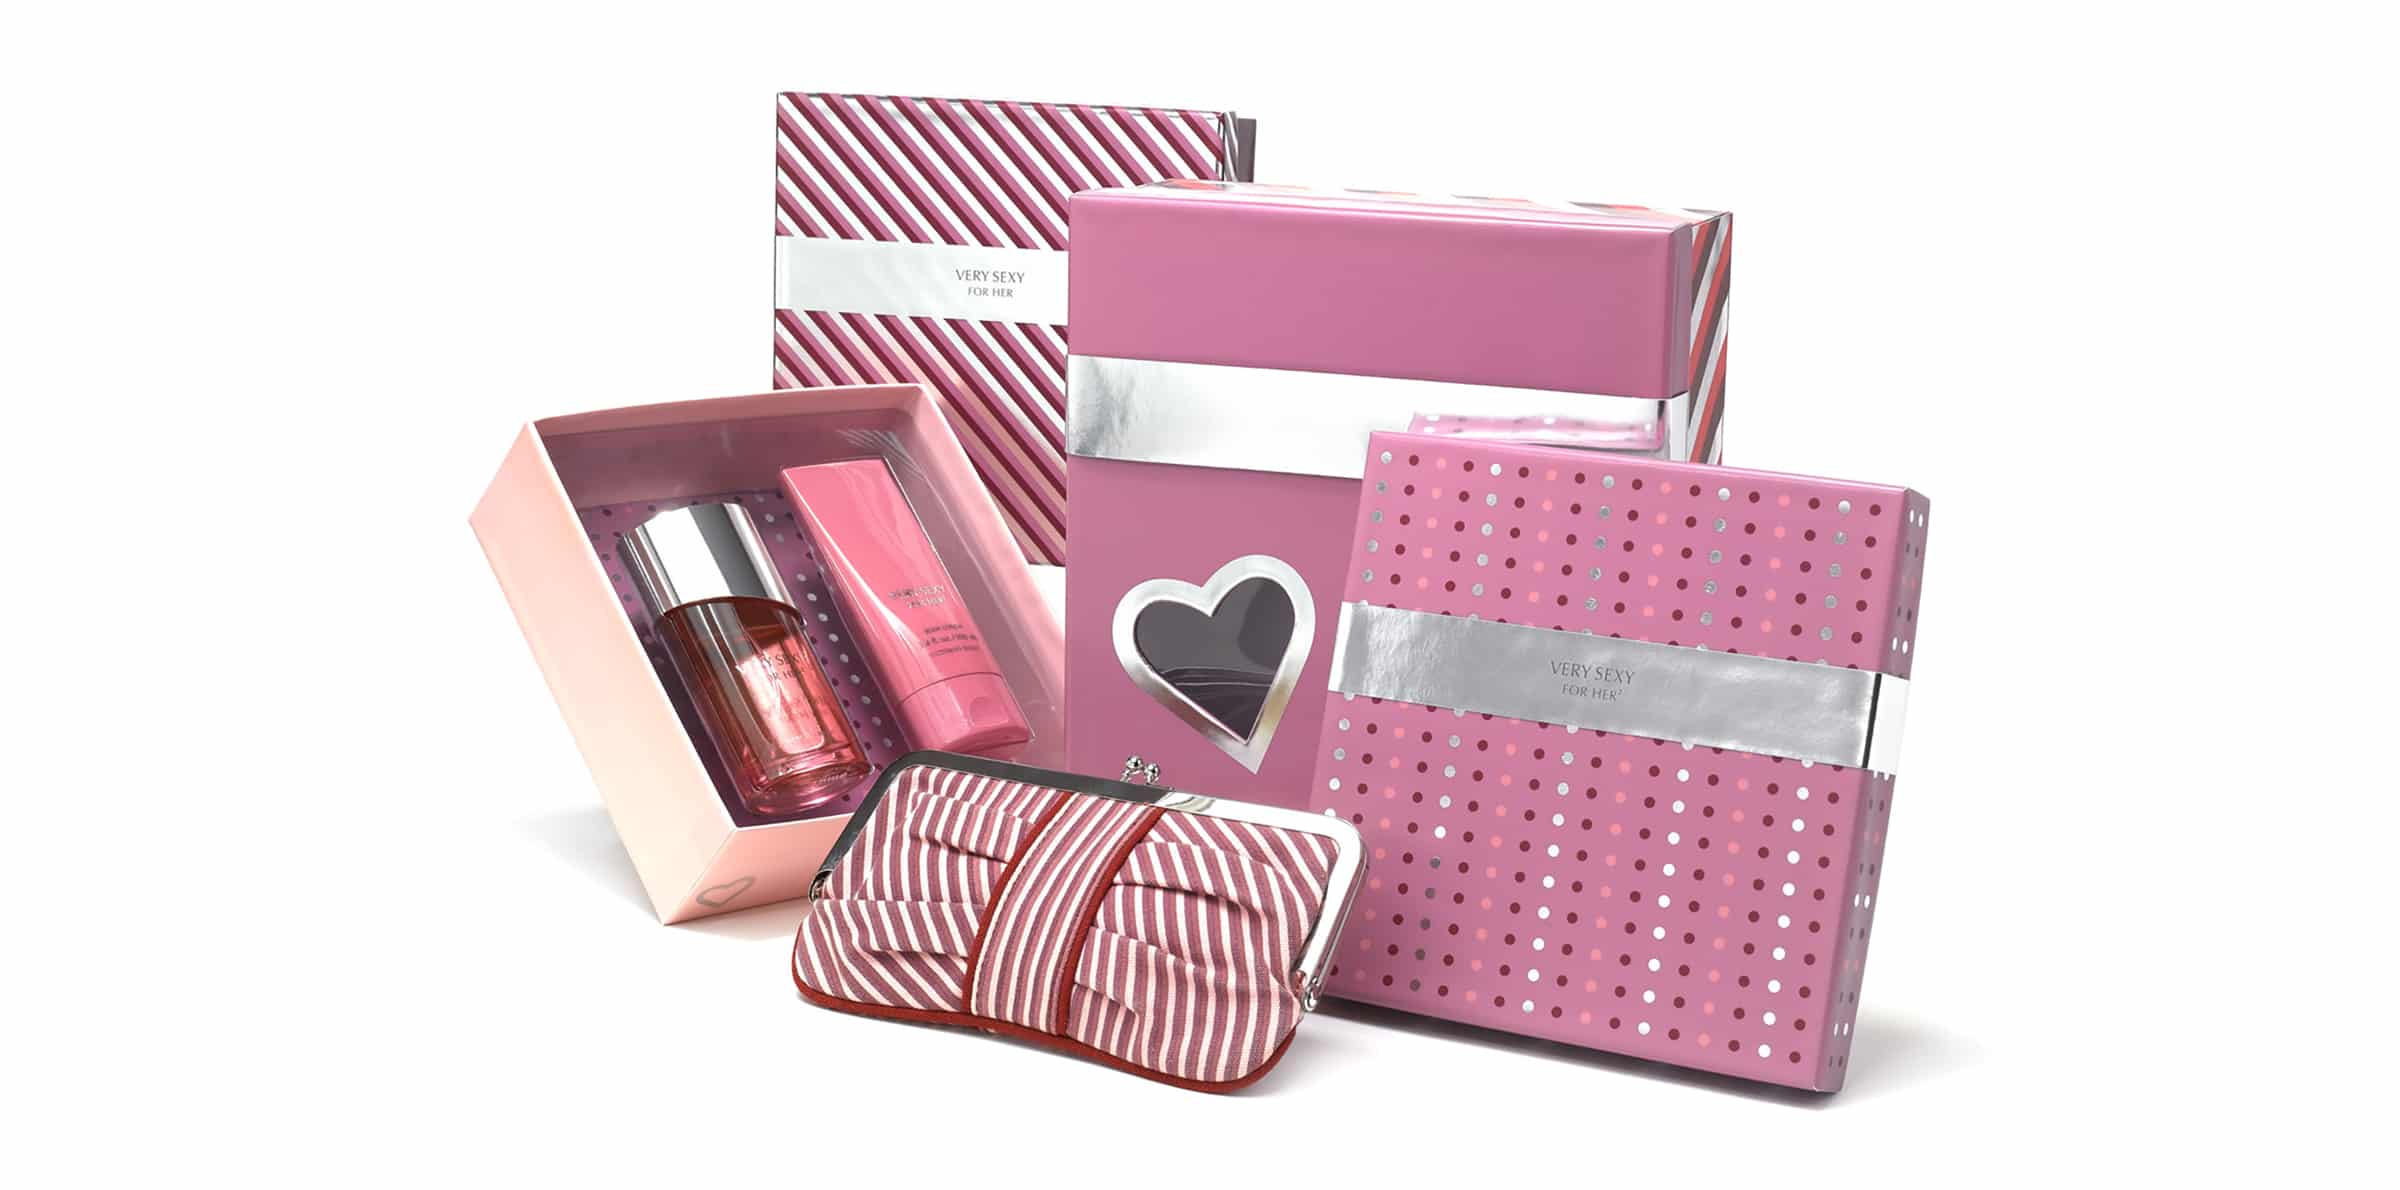 Cosmetic packaging design for Victoria's Secret Very Sexy For Her box design in pink, silver, red, with polka dots, diagonal stripes, and heart icons.